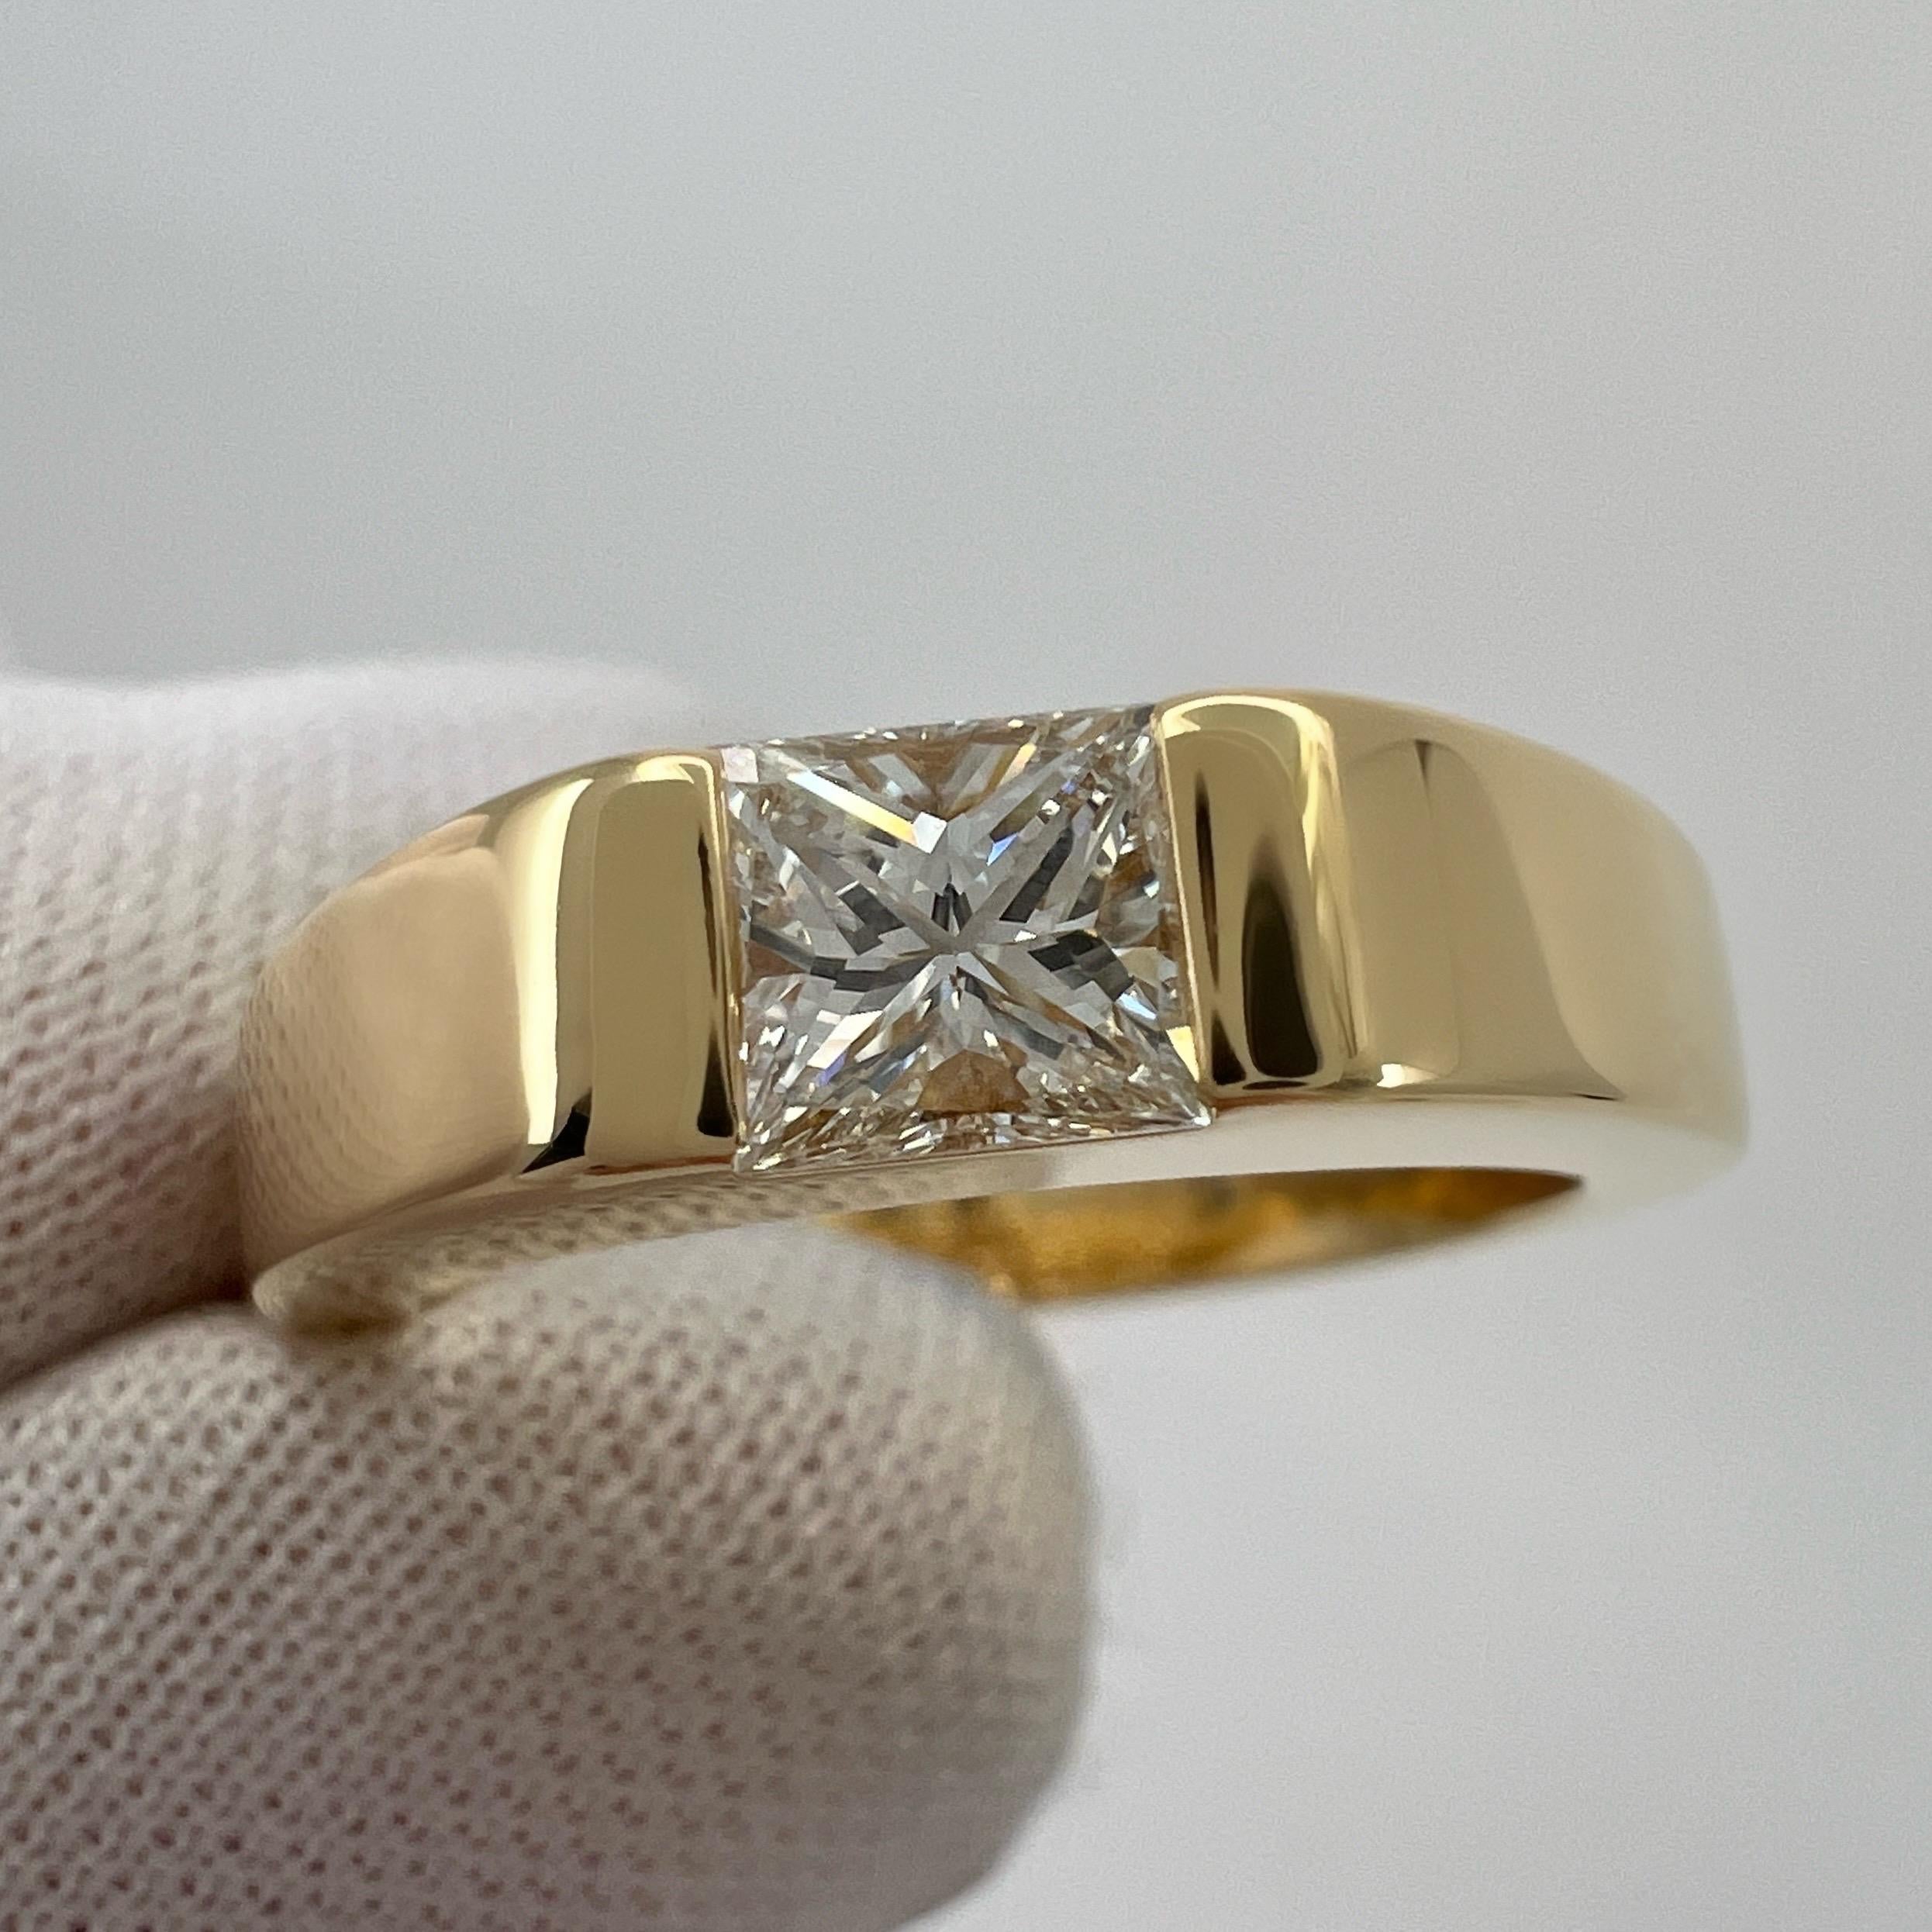 Vintage Cartier Natural Square Princess Cut Diamond 18k Yellow Gold Solitaire Band Ring.

Stunning yellow gold ring set with a fine 0.45ct natural square princess cut diamond. Approx. E/F colour VVS clarity with an excellent cut.
Fine jewellery